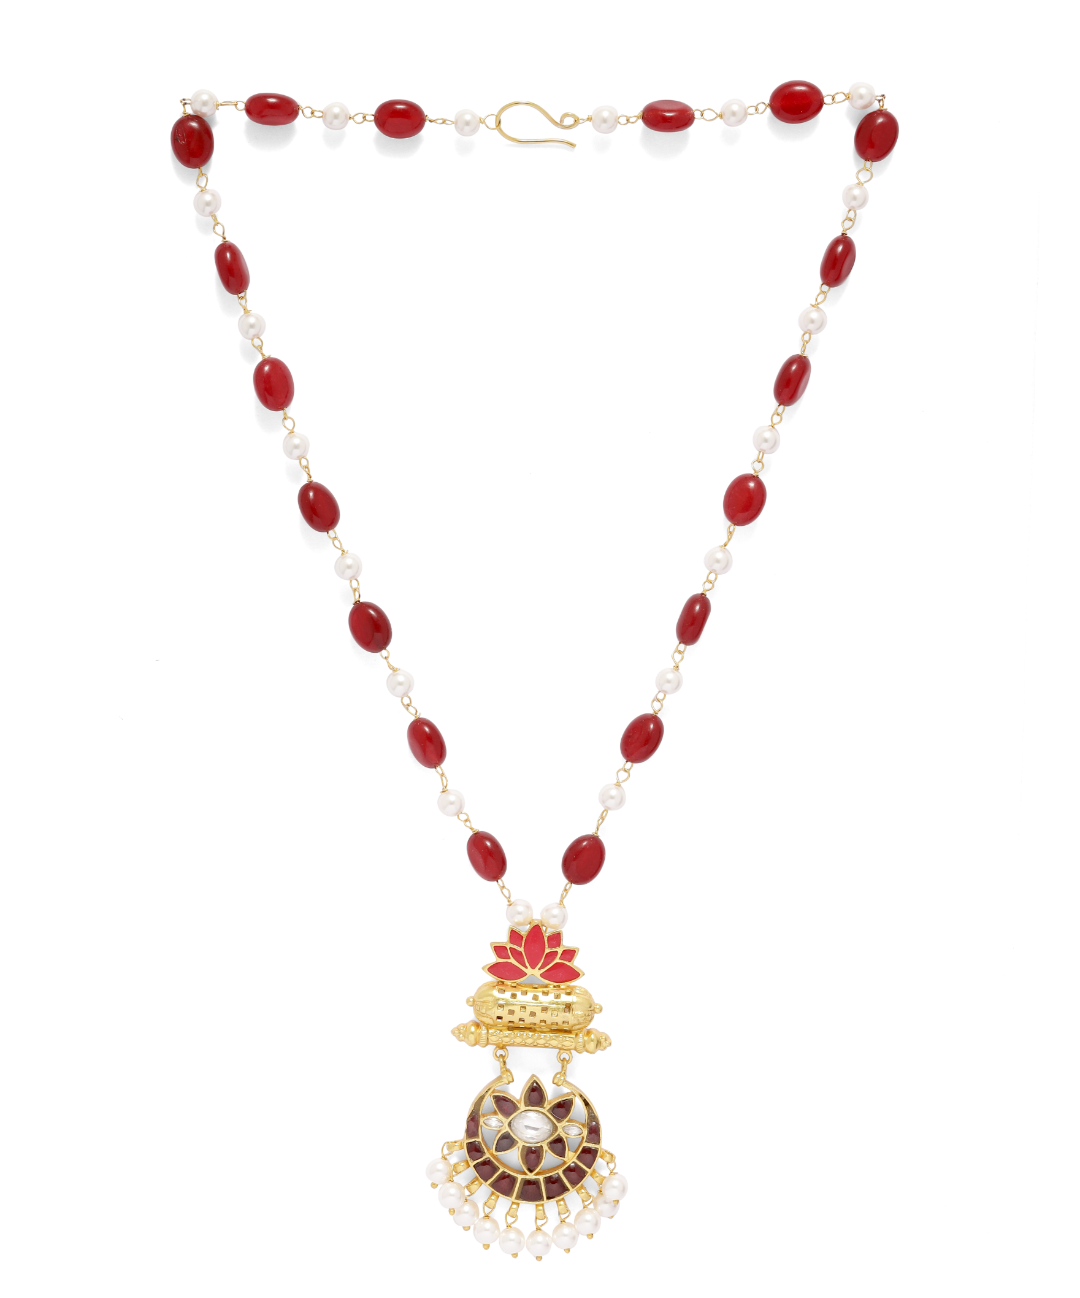 Kamal tabeez chand necklace in Sterling silver with 18 karat gold plating. Pink enamel, Jadau stones, Stringing with red Quartz and Pearls.